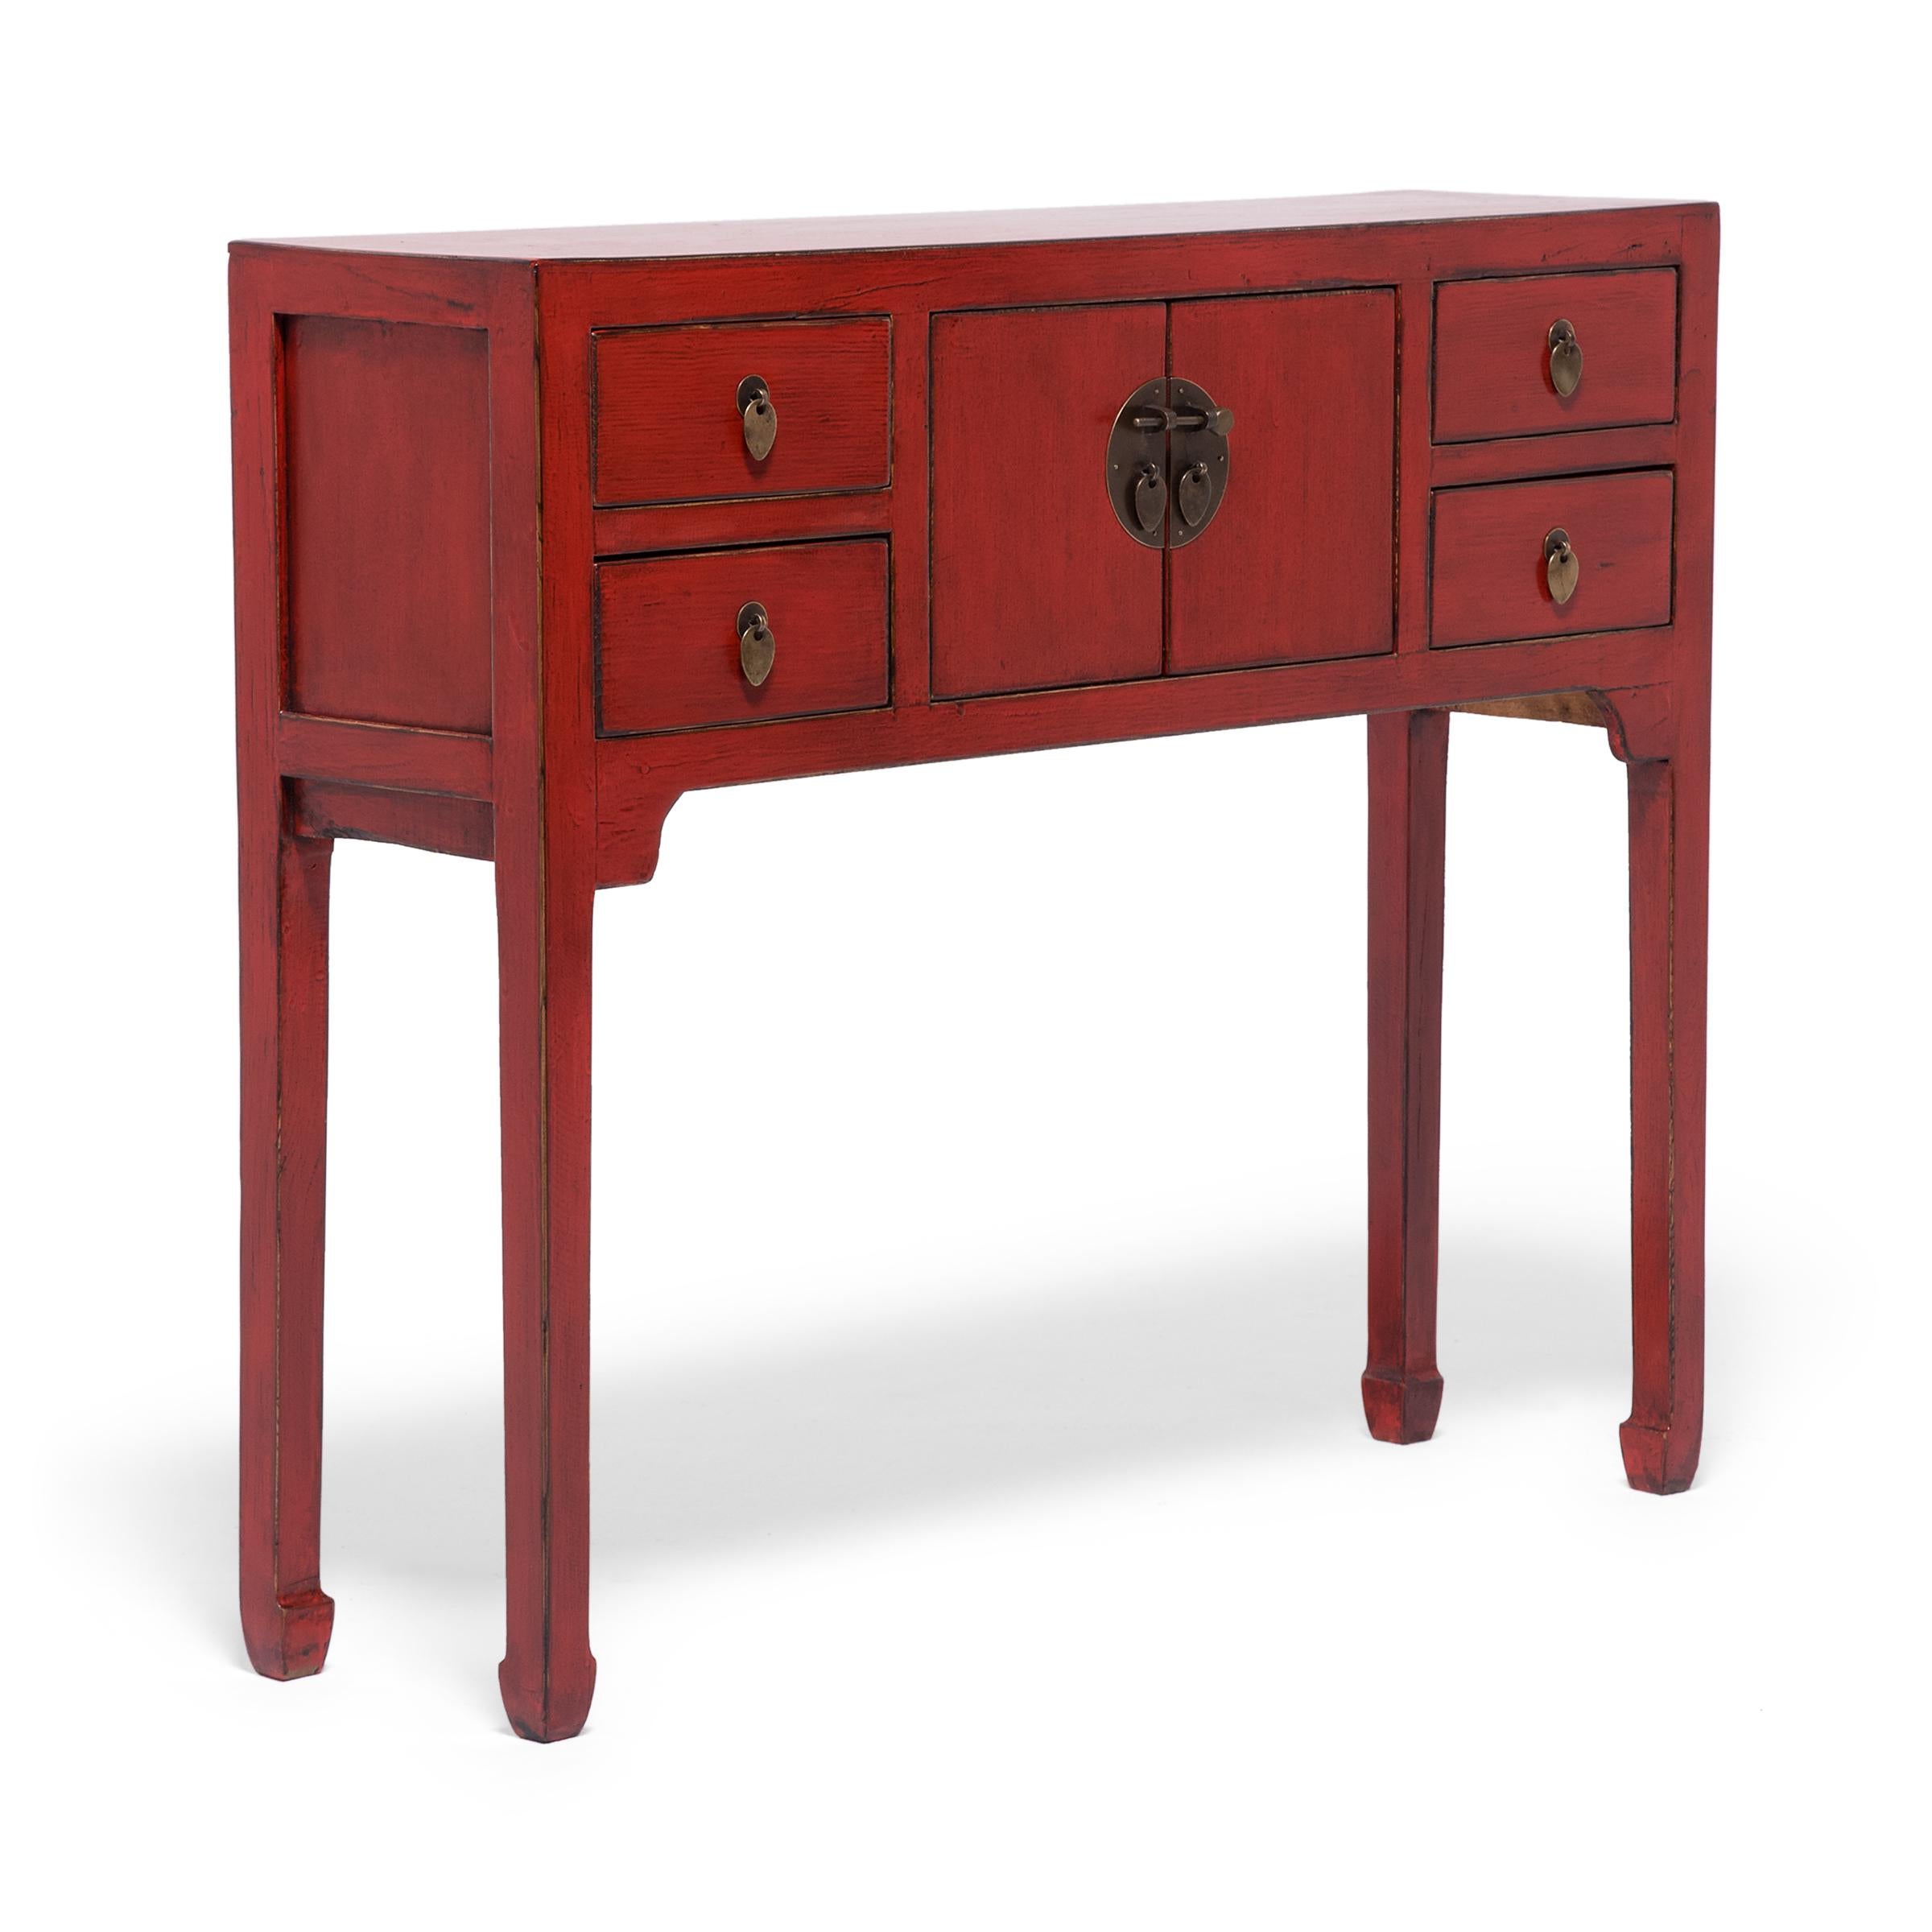 This red lacquer altar coffer keeps with the style of Ming-dynasty furniture through its clean lines and minimal ornamentation. The slim legs and delicate hoof feet bring the eye upwards the squared frame and contribute to the effortless simplicity